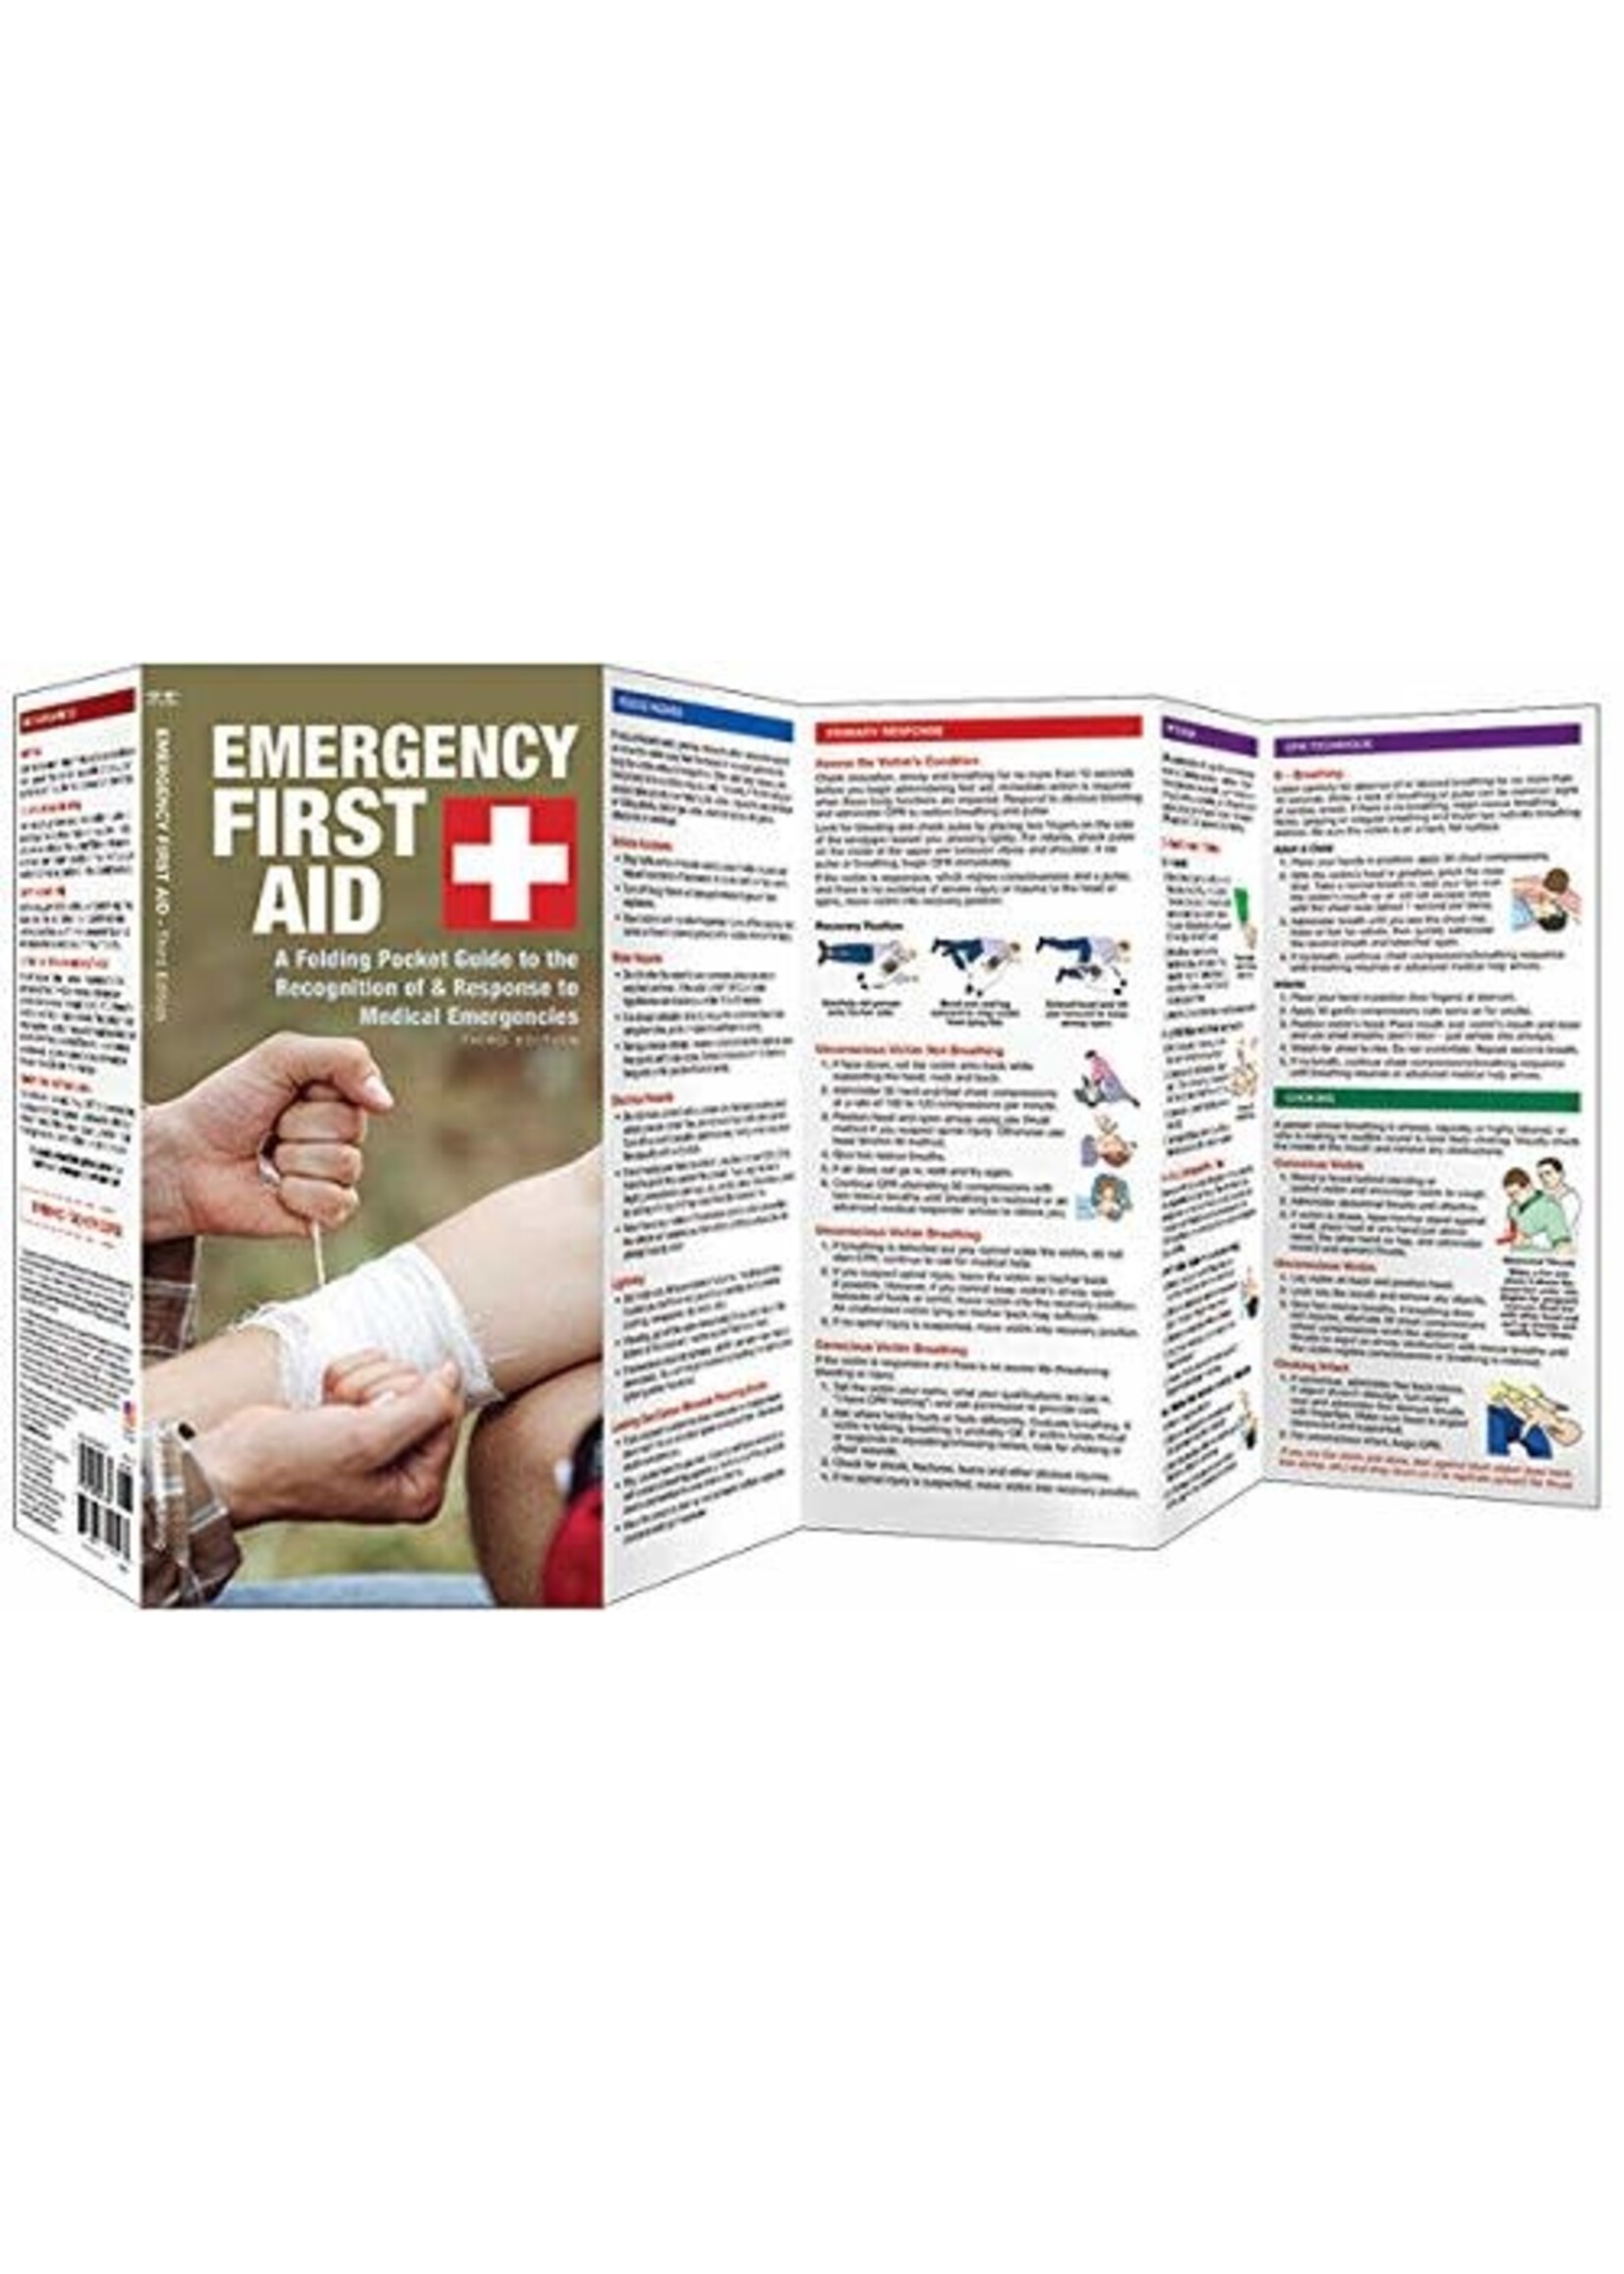 Emergency First Aid: A Folding Pocket Guide